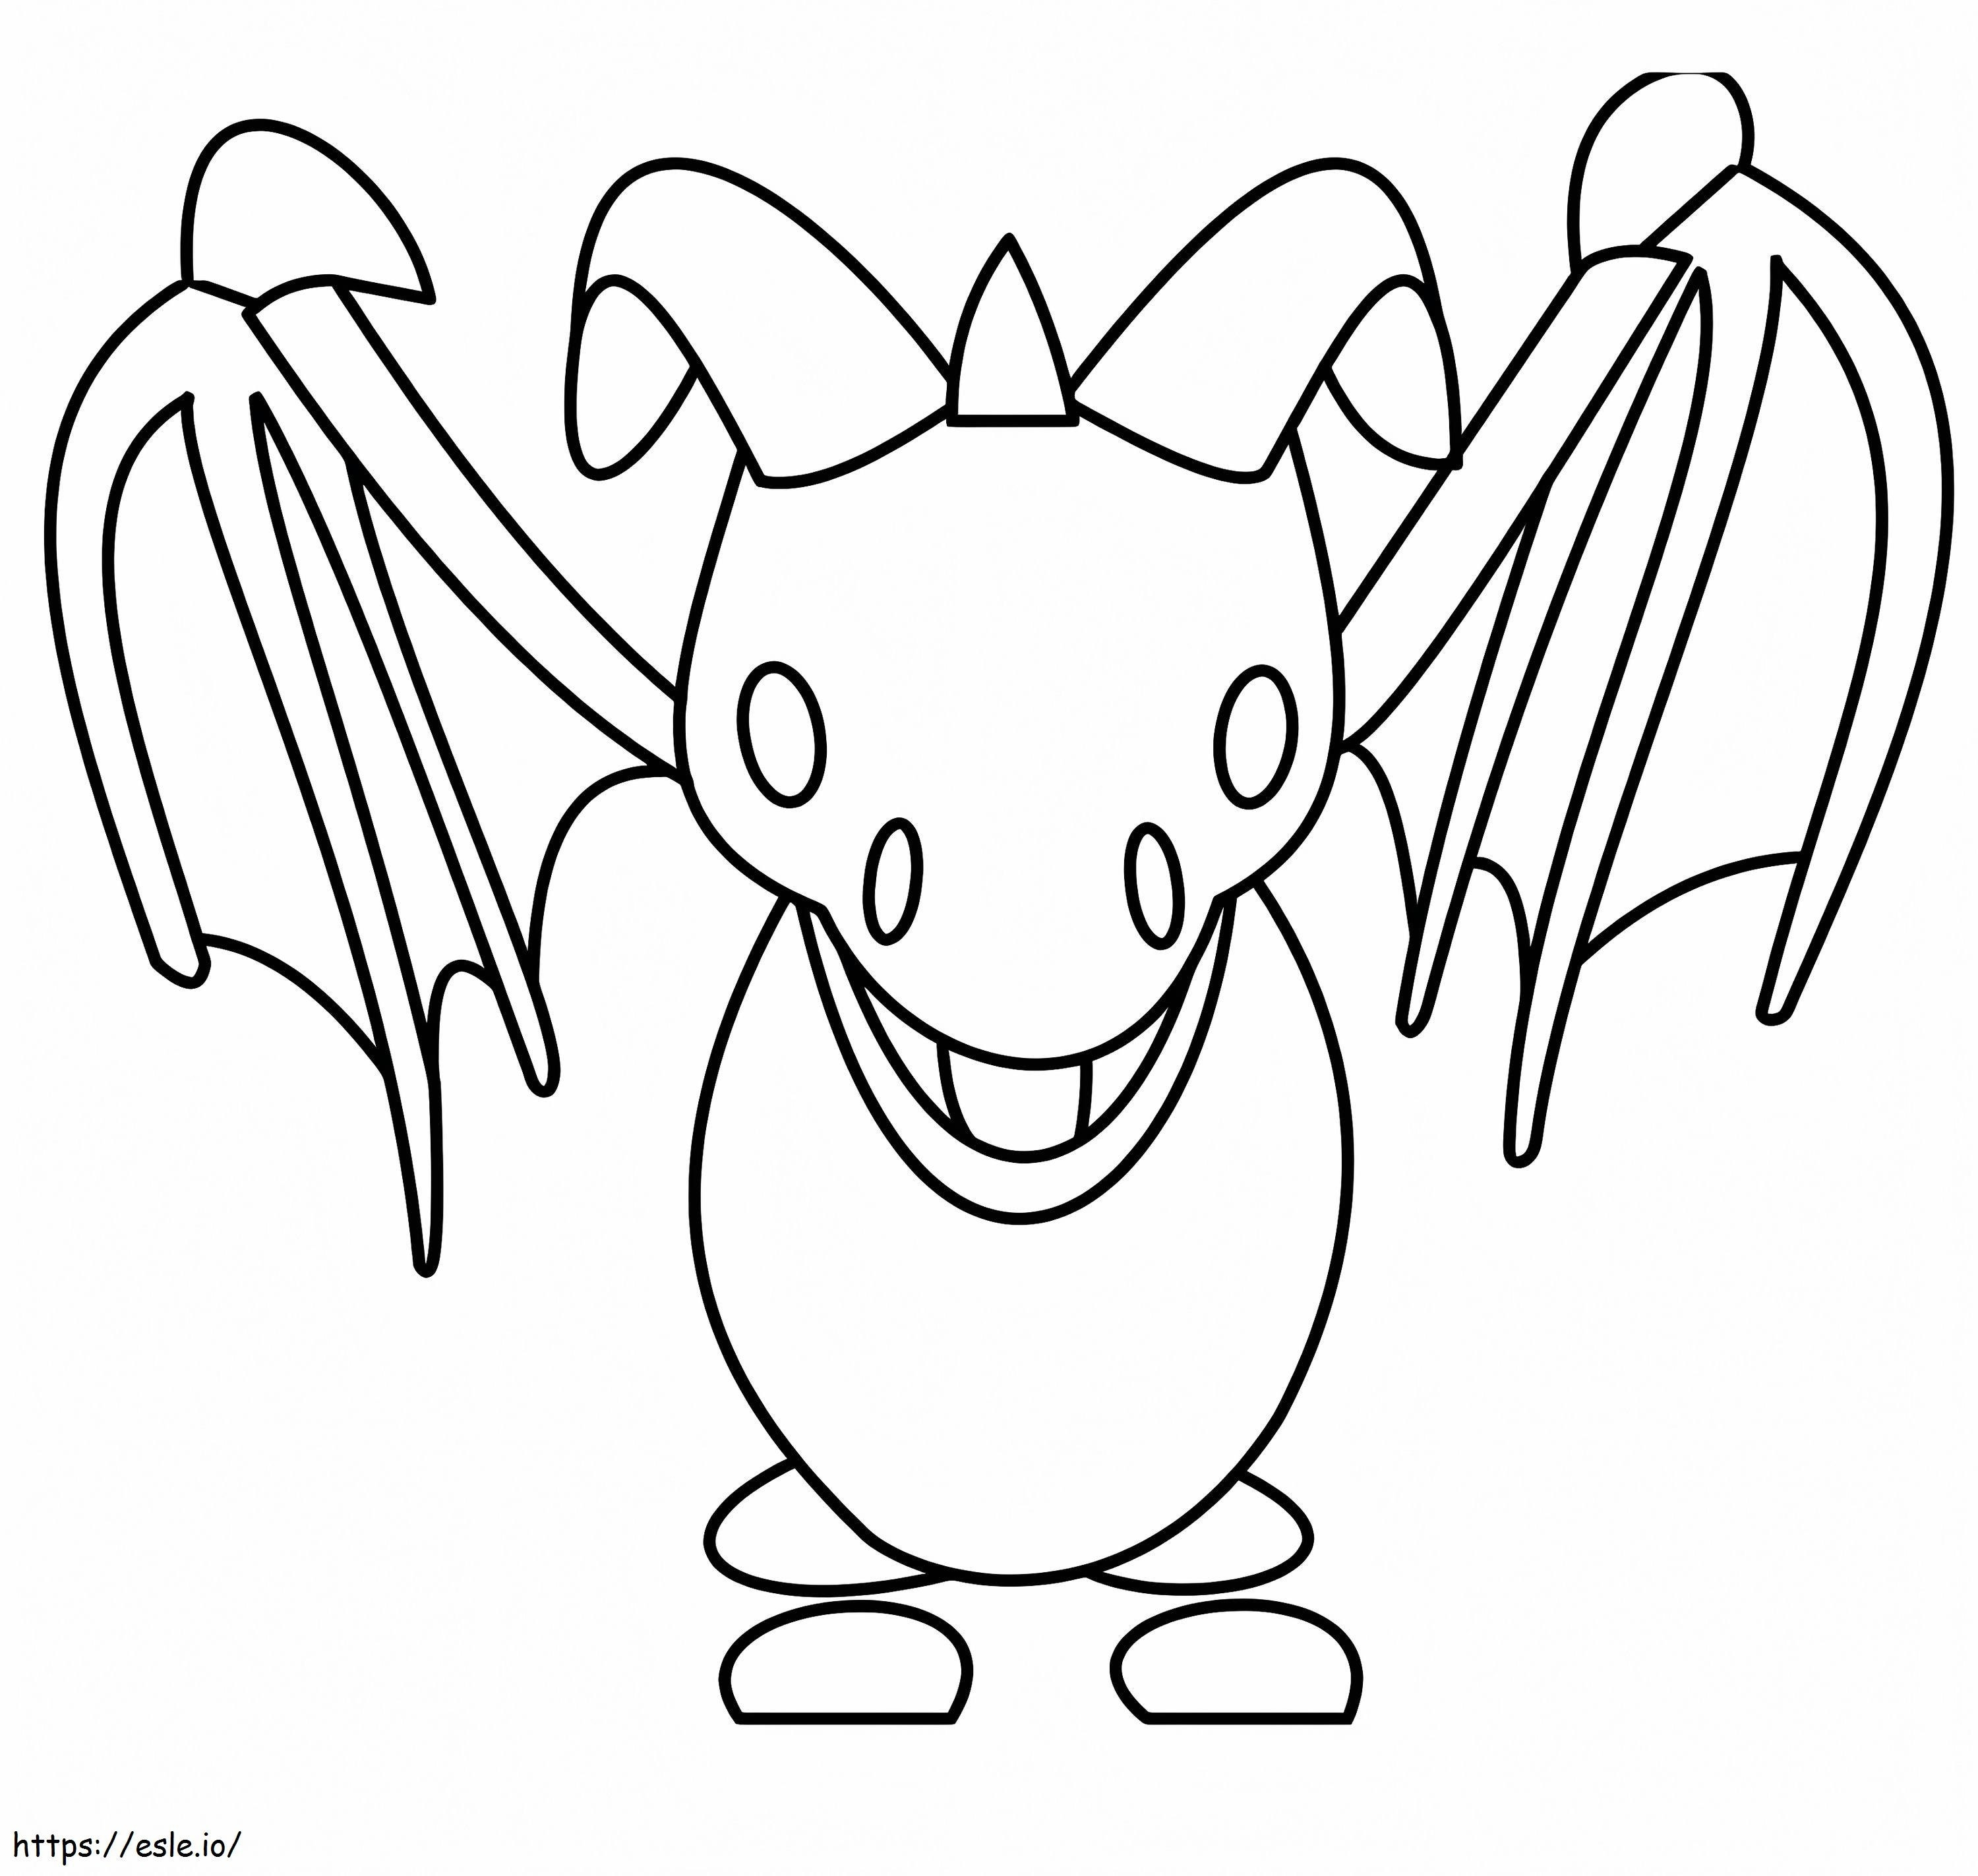 Frost Dragon Adopt Me coloring page